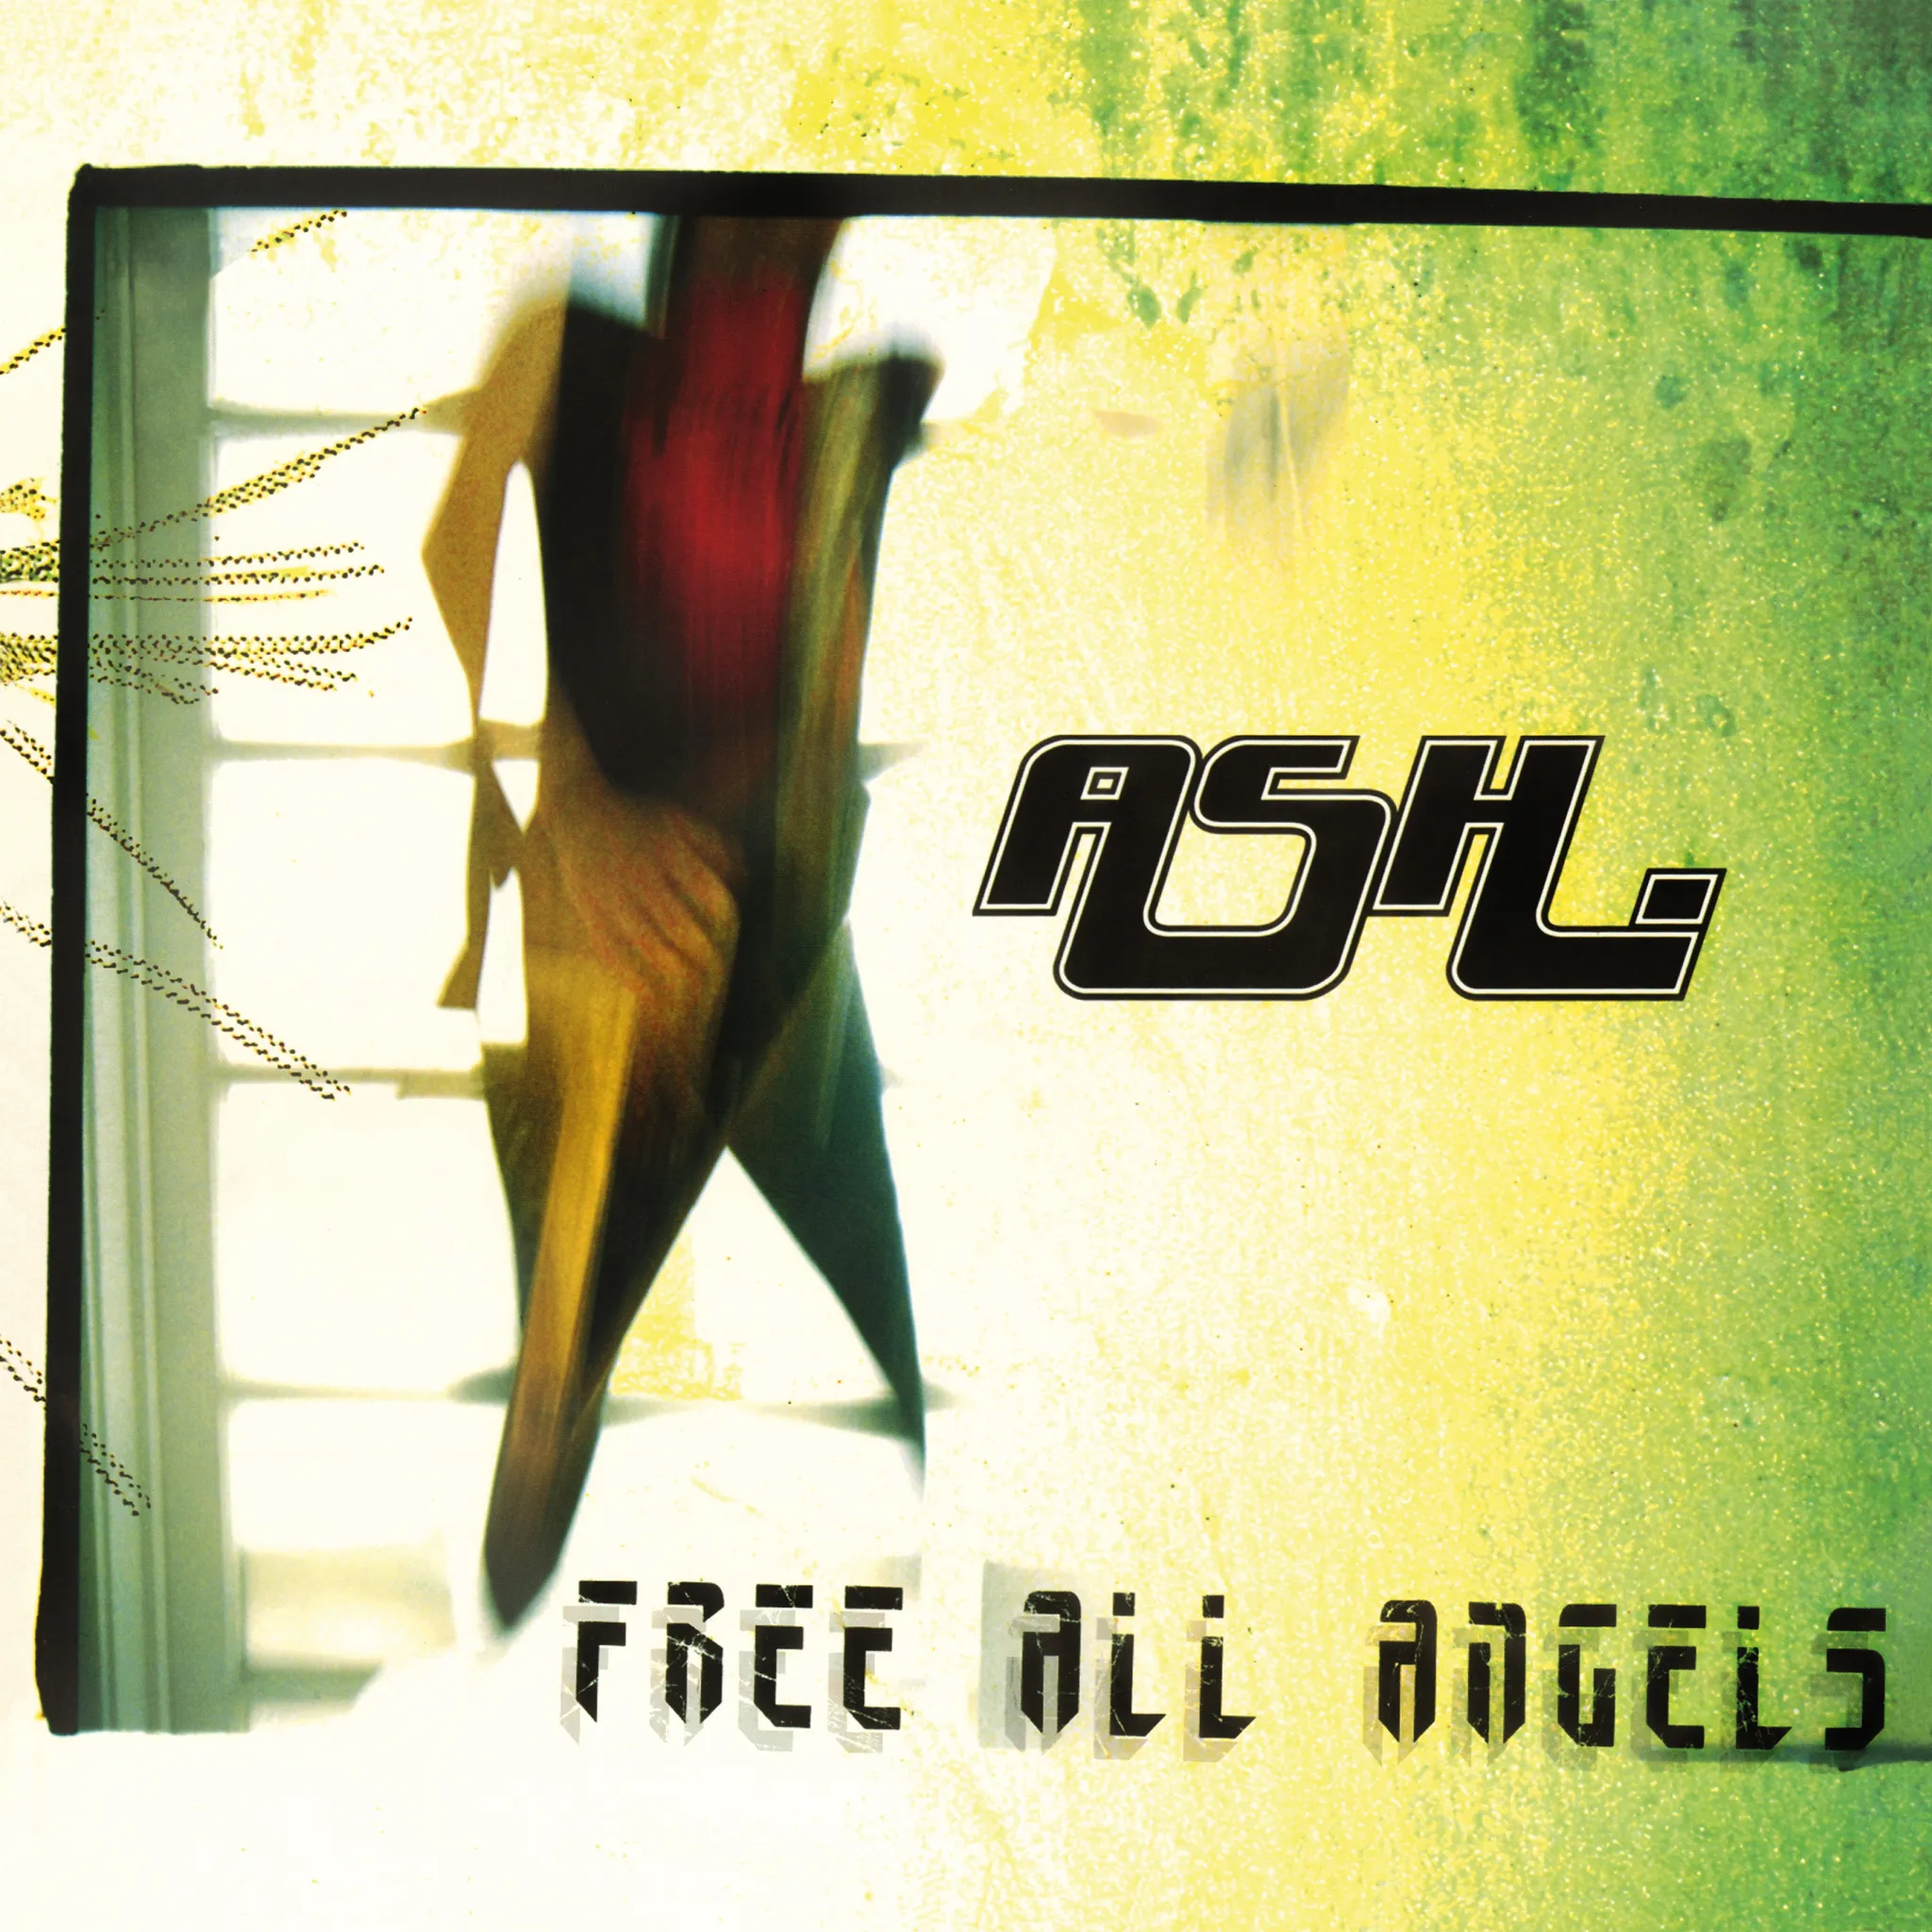 <strong>Ash - Free All Angels</strong> (Vinyl LP - yellow)